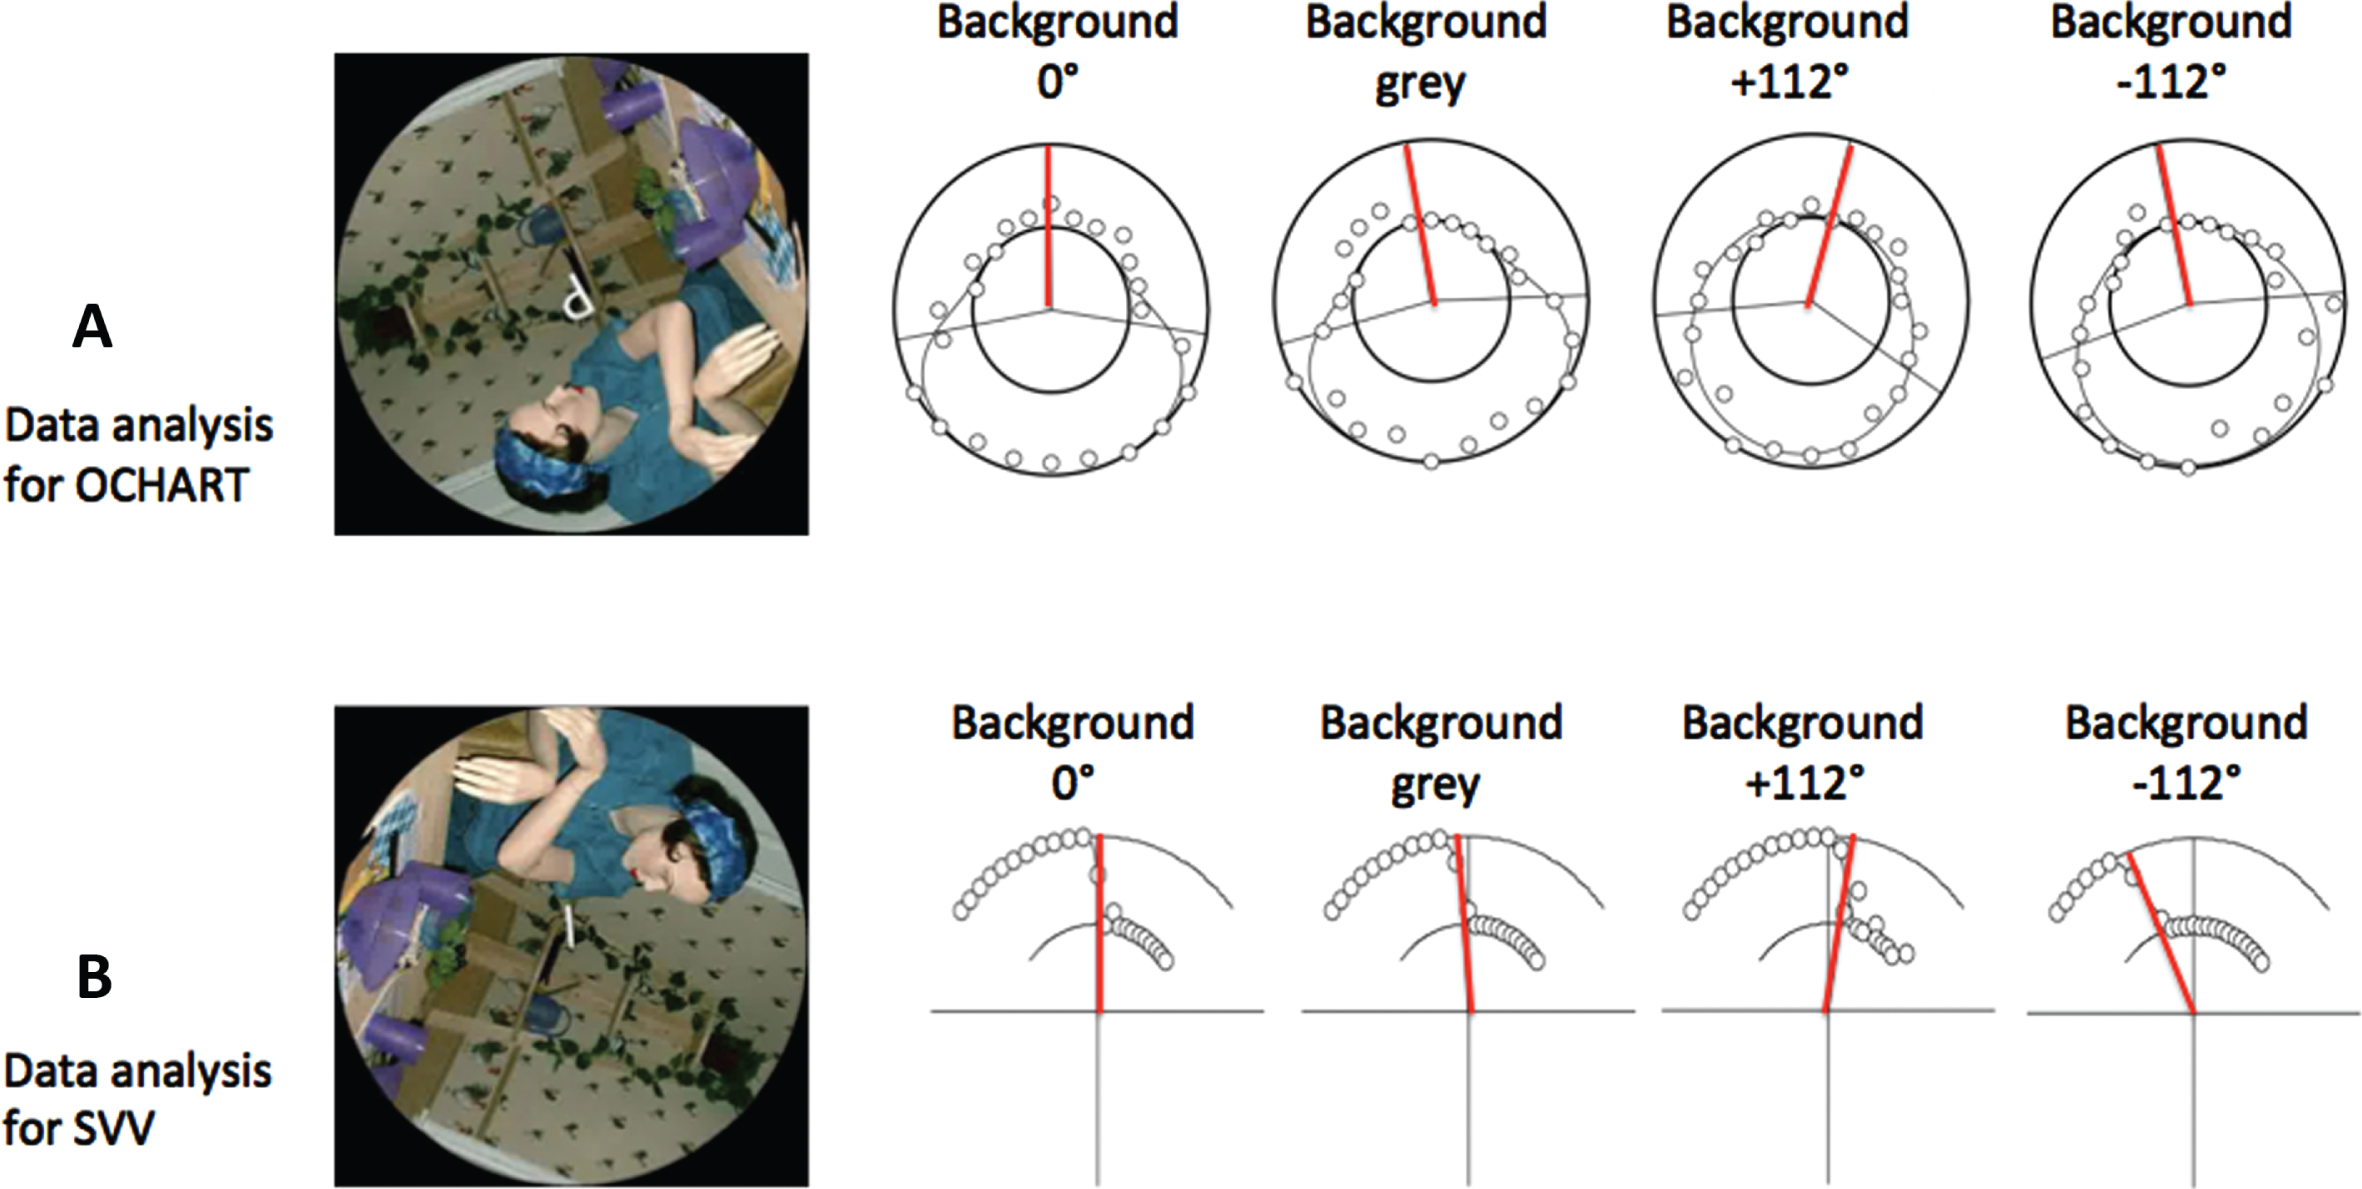 Sample responses for the SVV and OChaRT probes. Each row shows responses for one participant for the four backgrounds for a single body orientation. The figure in the visual display is a photograph of a manikin added to provide realistic orientation cues. (A) OChaRT: A product of two psychometric functions is plotted through the data in polar coordinates where the outer circle represents “probe interpreted as a ‘d’ 100%of the time” and the inner circle represents “probe interpreted as a ‘p’ 100%of the time”. The PU is defined as the midpoint between the PSEs (50%points) of the two psychometric functions, indicated by red radial lines. (B) SVV: A psychometric function is plotted through the data in polar coordinates where the outer circle represents “probe tilted to the left of gravity 100%of the time” and the inner circle represents “probe tilted to the right of gravity 100%of the time”. The SVV is the 50%point of this curve, indicated by the red radial lines. Sample OChaRT and SVV stimuli are also shown.